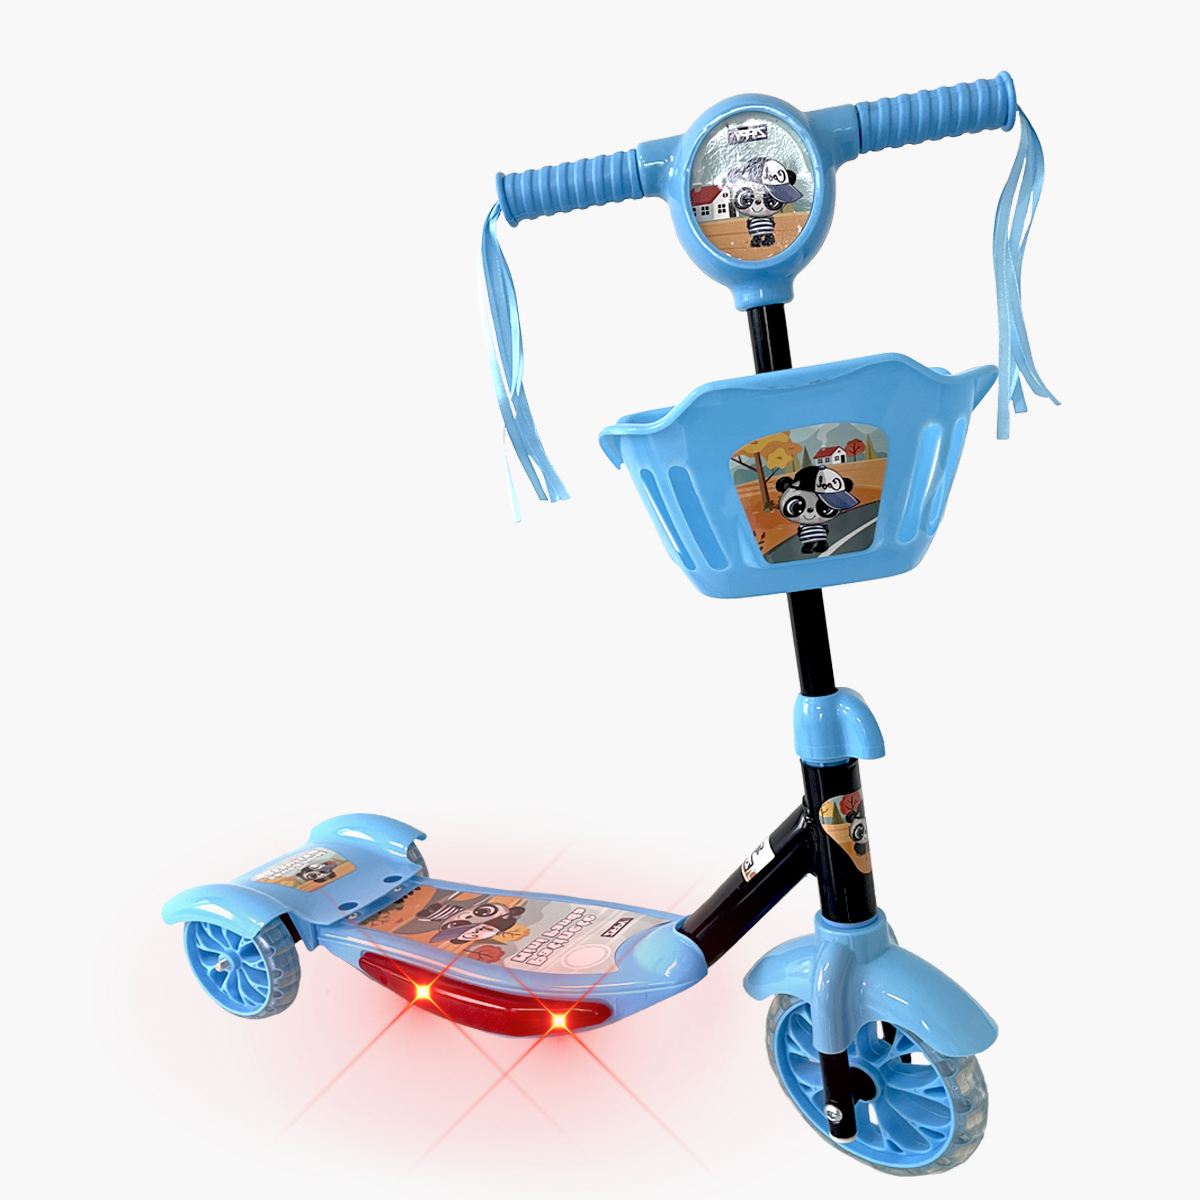 Patinete infantil con LED The Olympic Collection - Azul